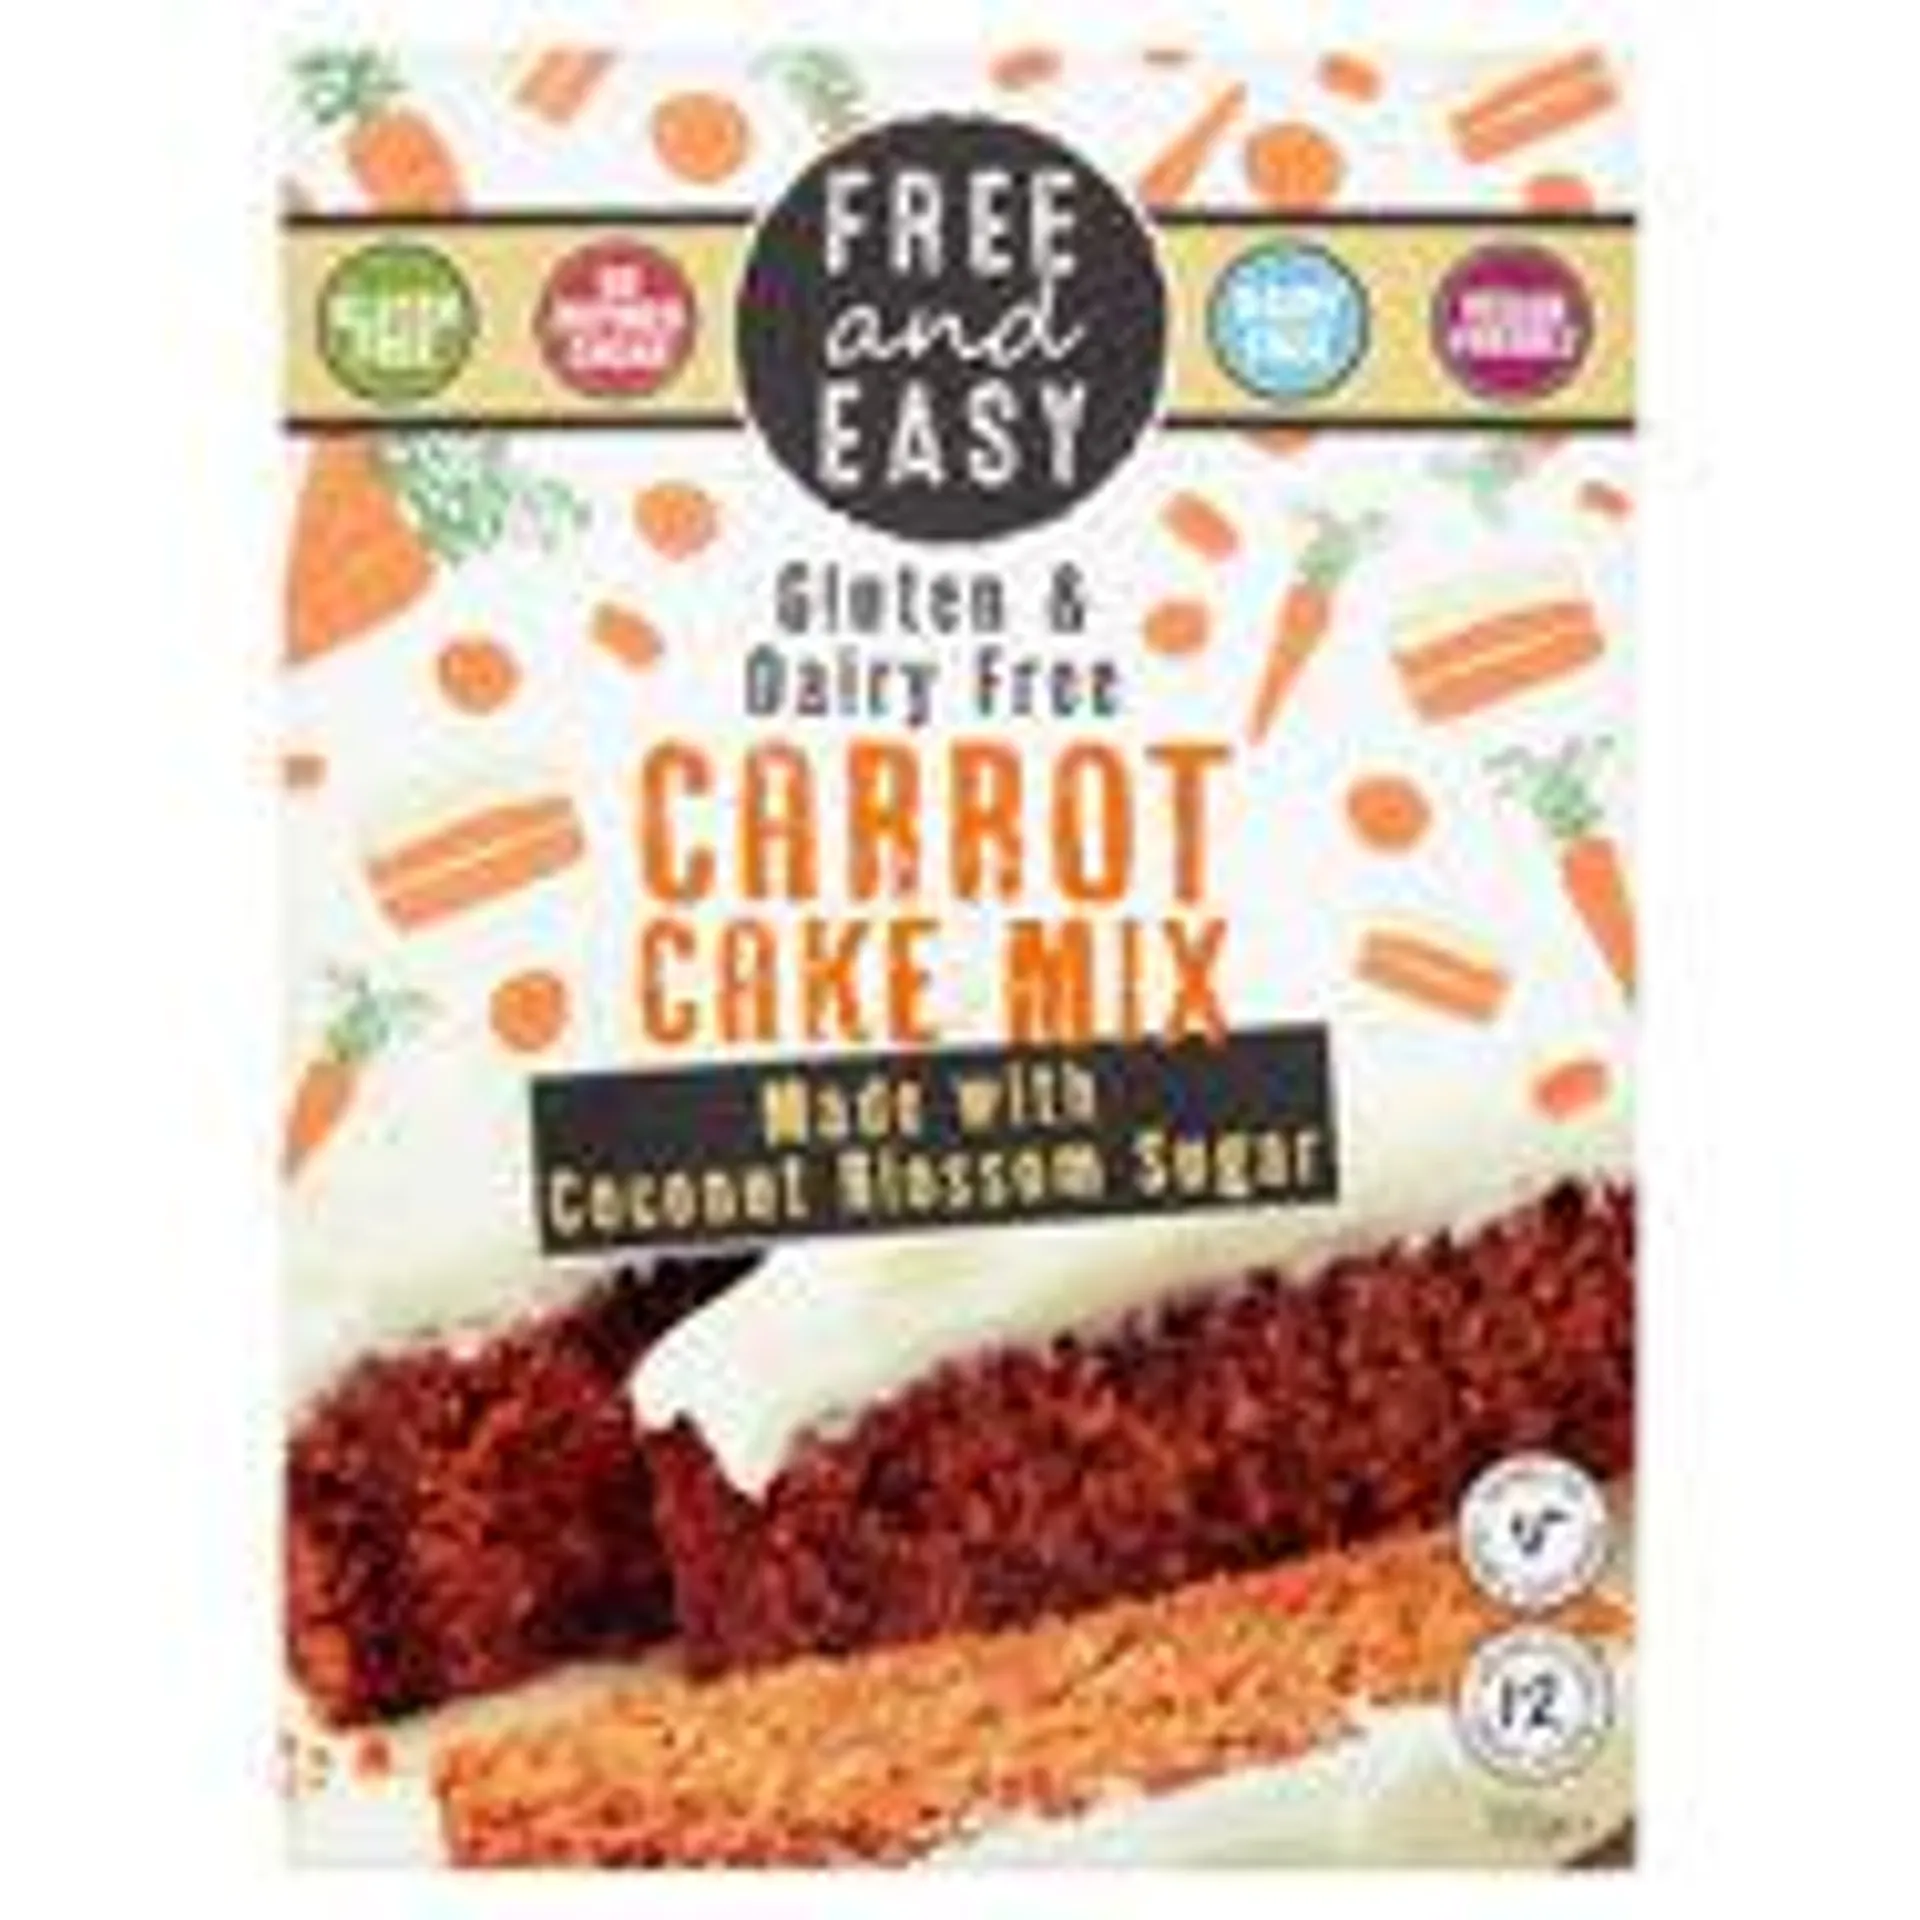 Free and Easy Gluten & Dairy Free Carrot Cake Mix